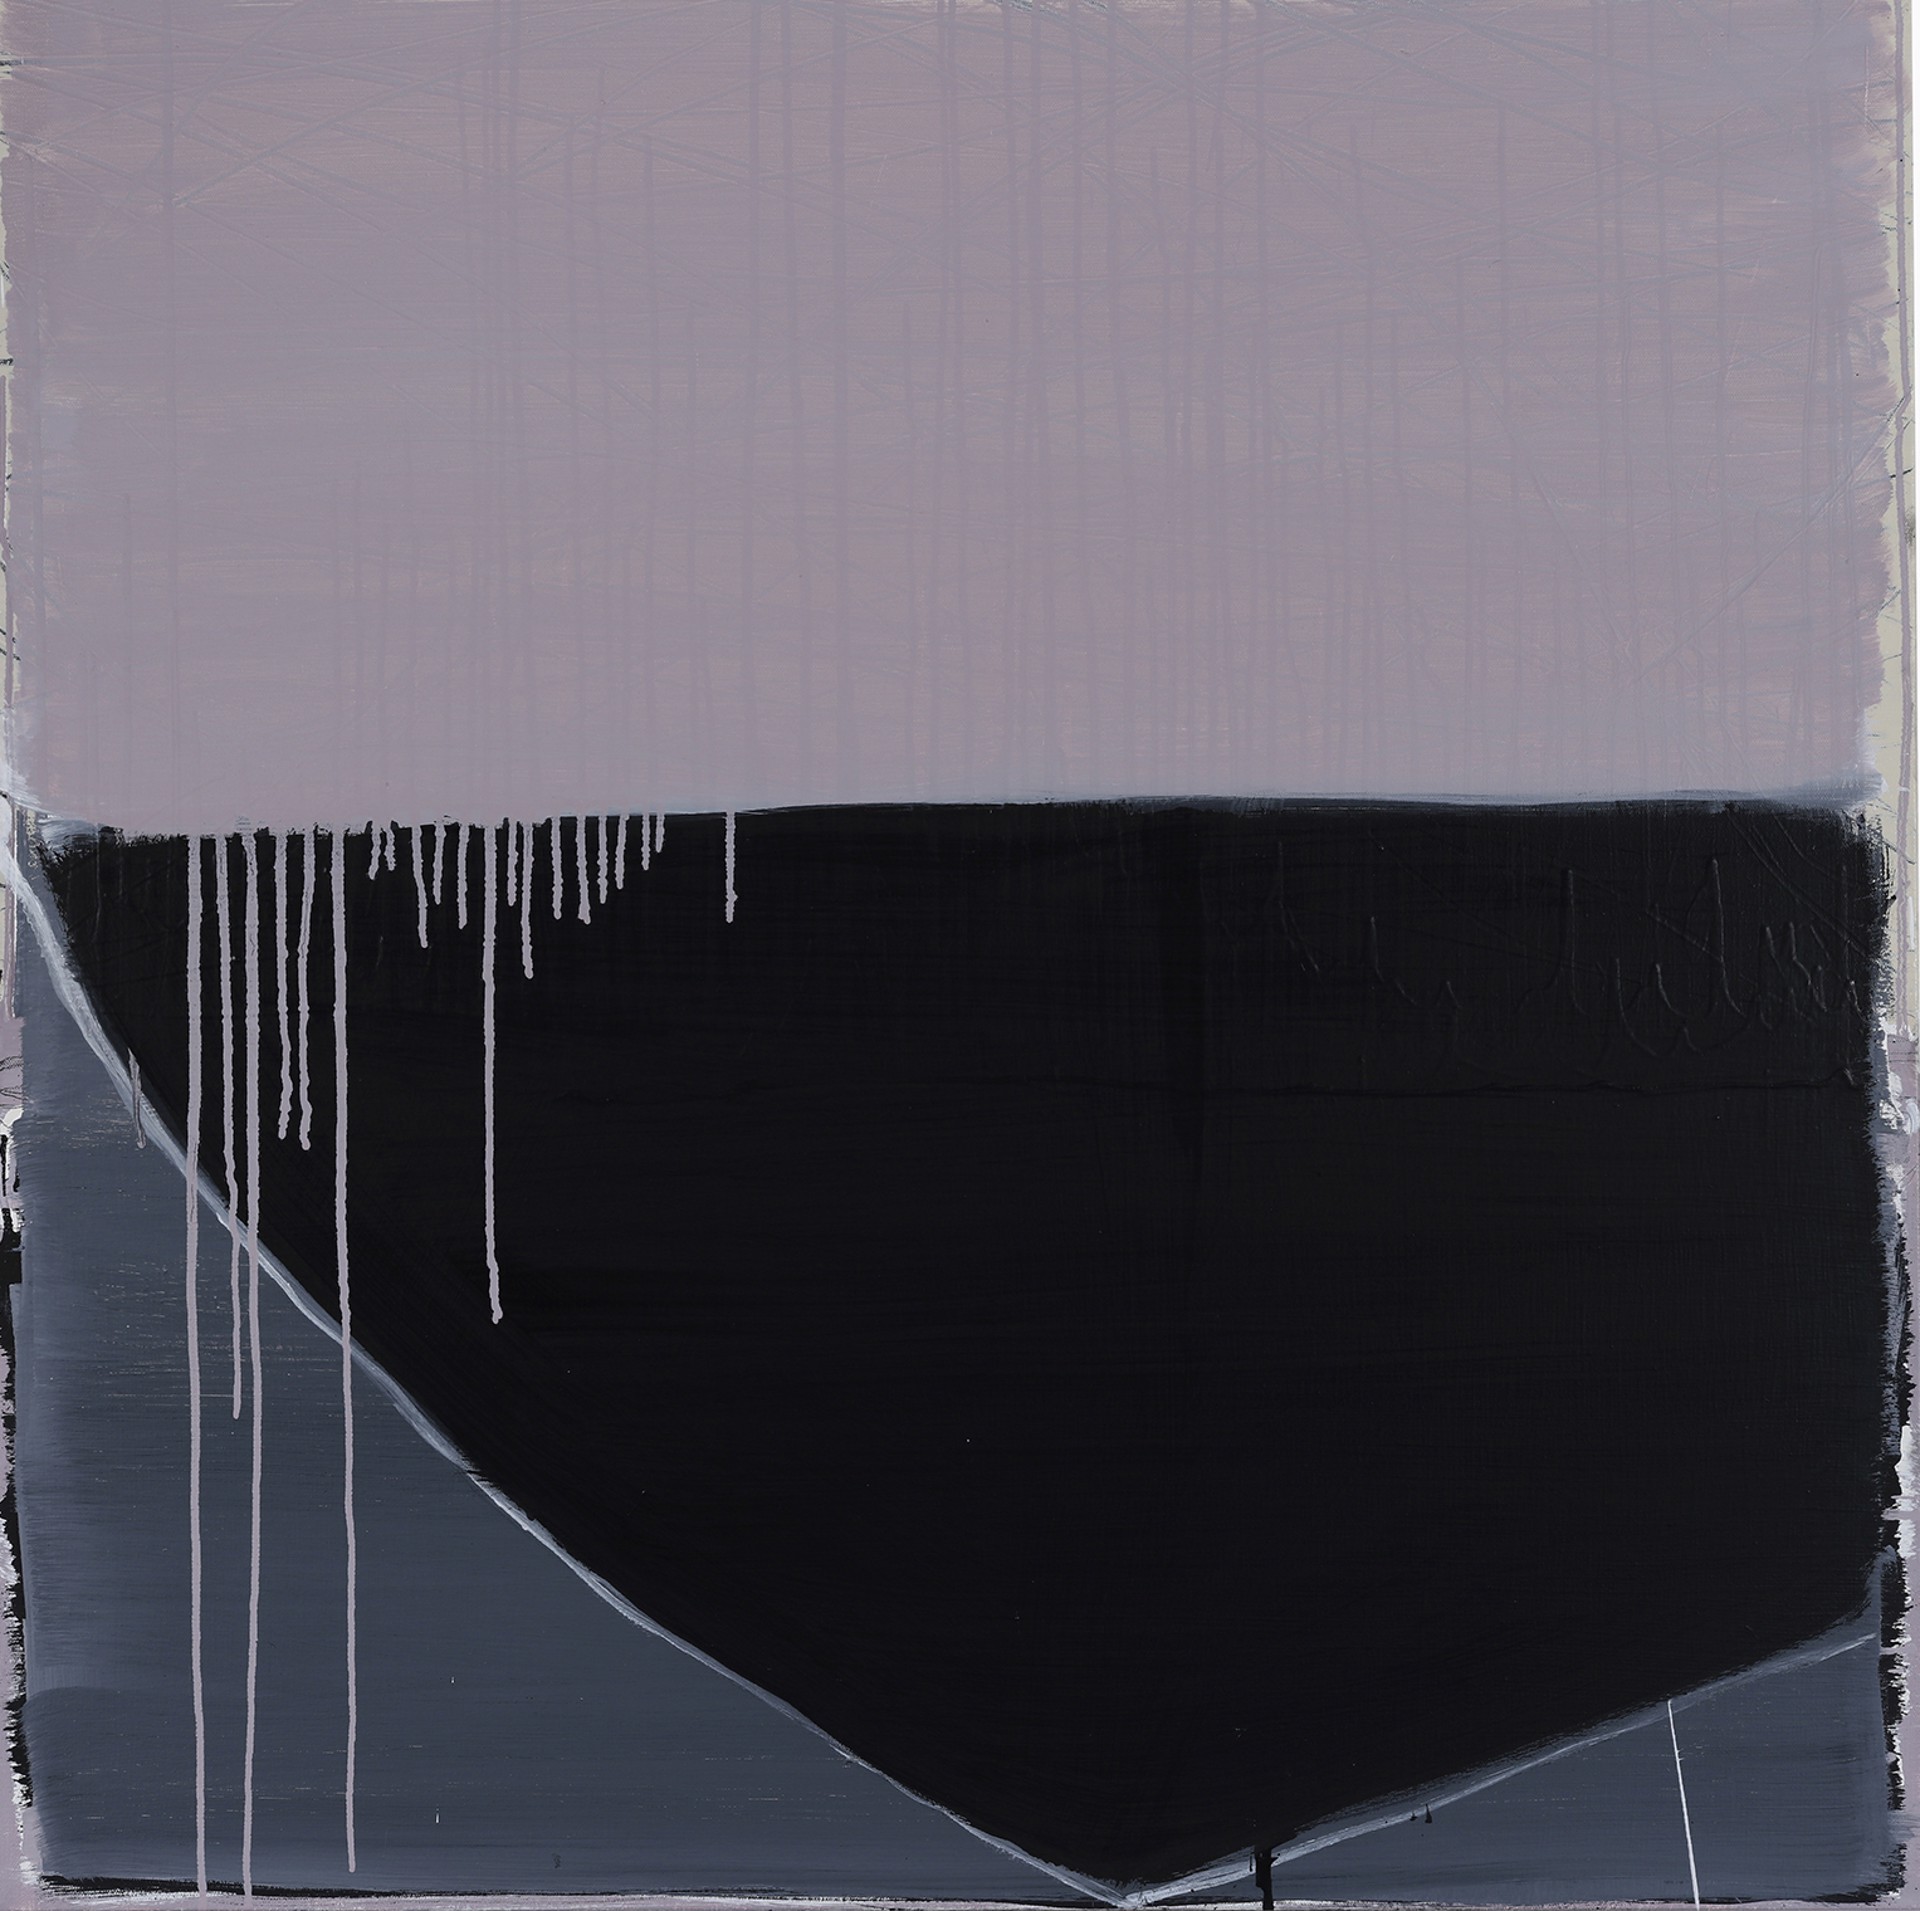 Dripping Lavender on Black on Gray by Anastasia Faiella